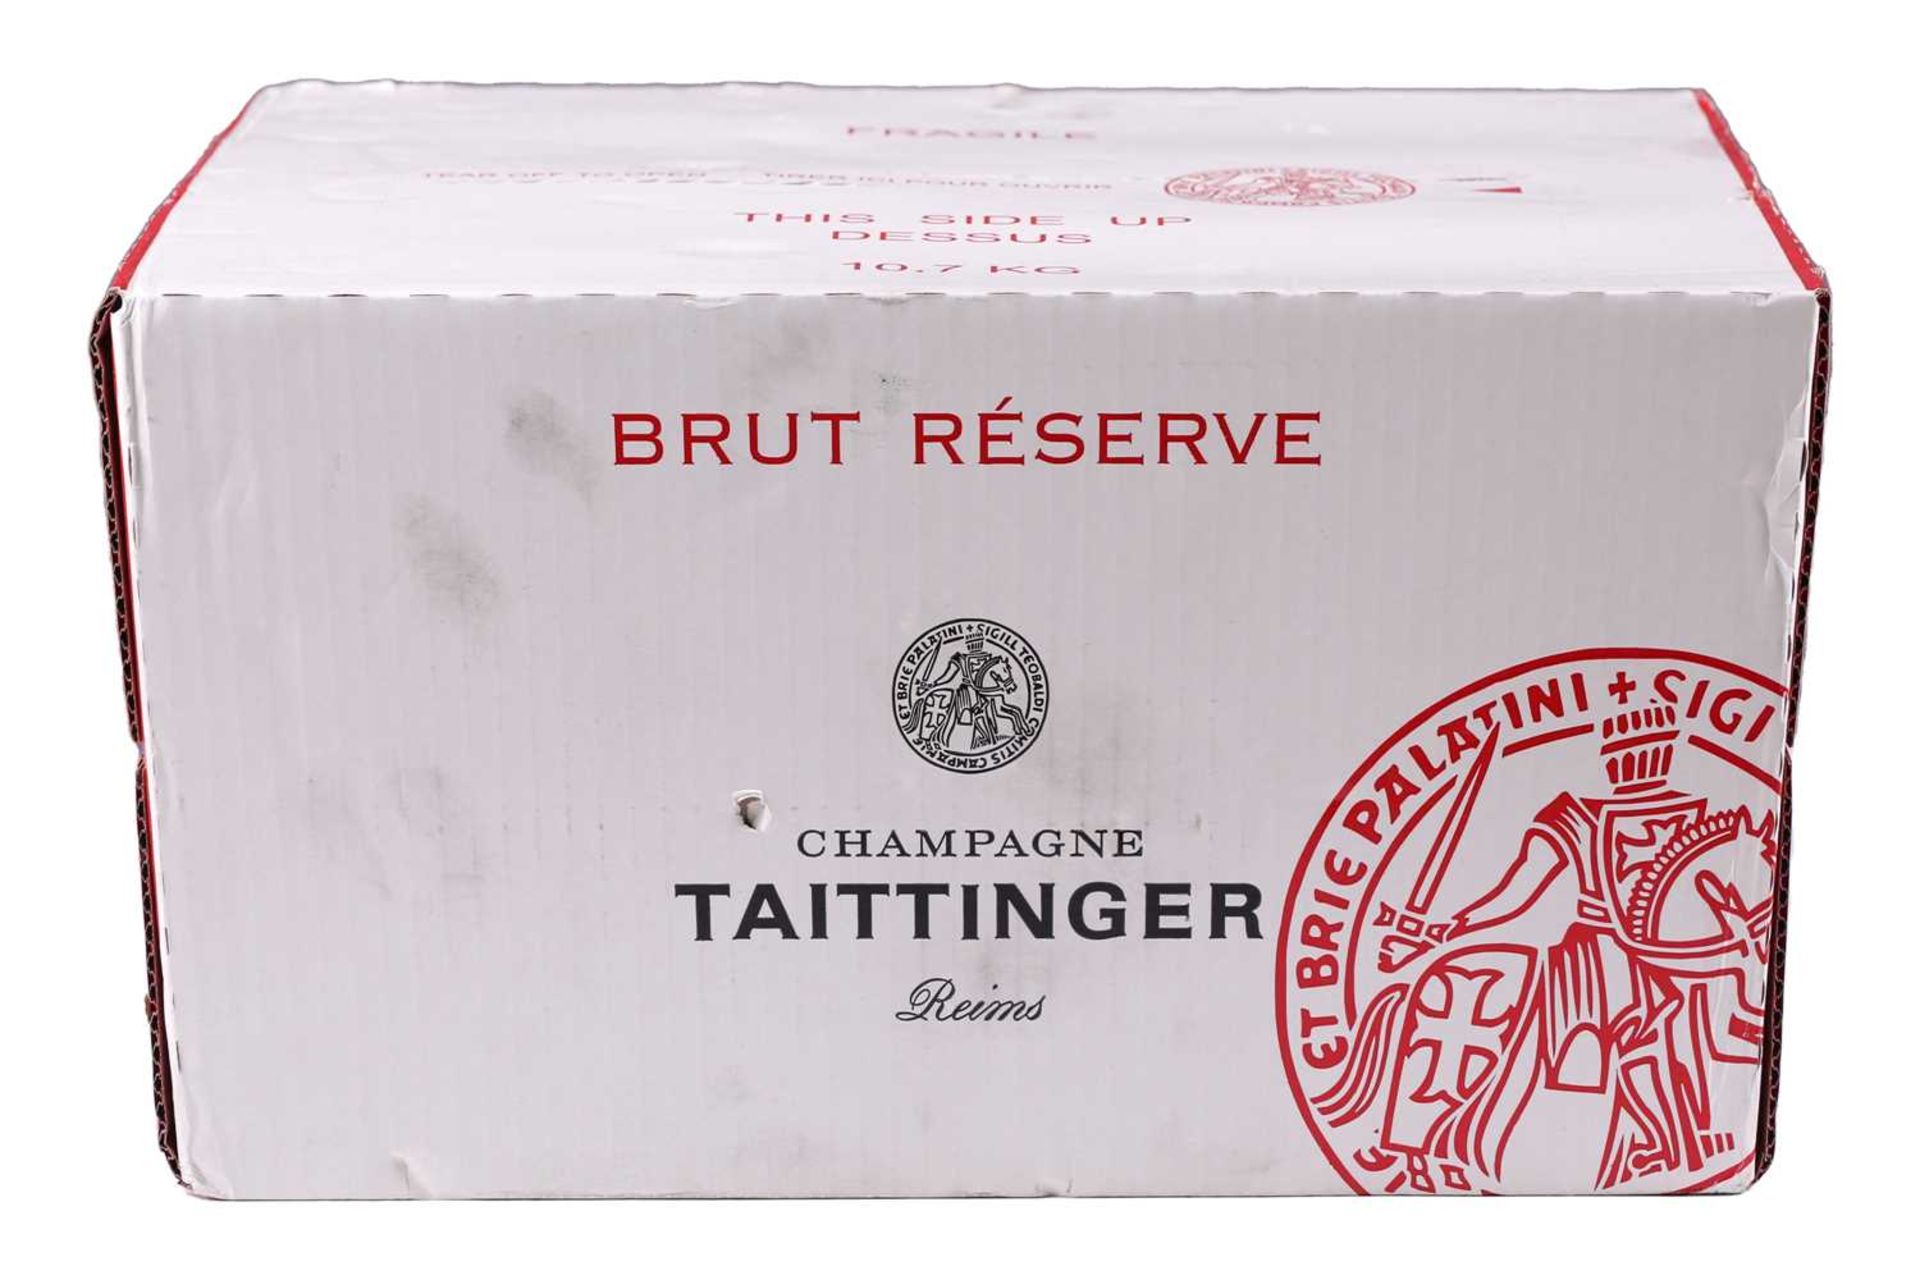 Six bottles of Taittinger Brut Reserve Champagne, 750ml in an unopened carton.Private collector in - Bild 2 aus 3